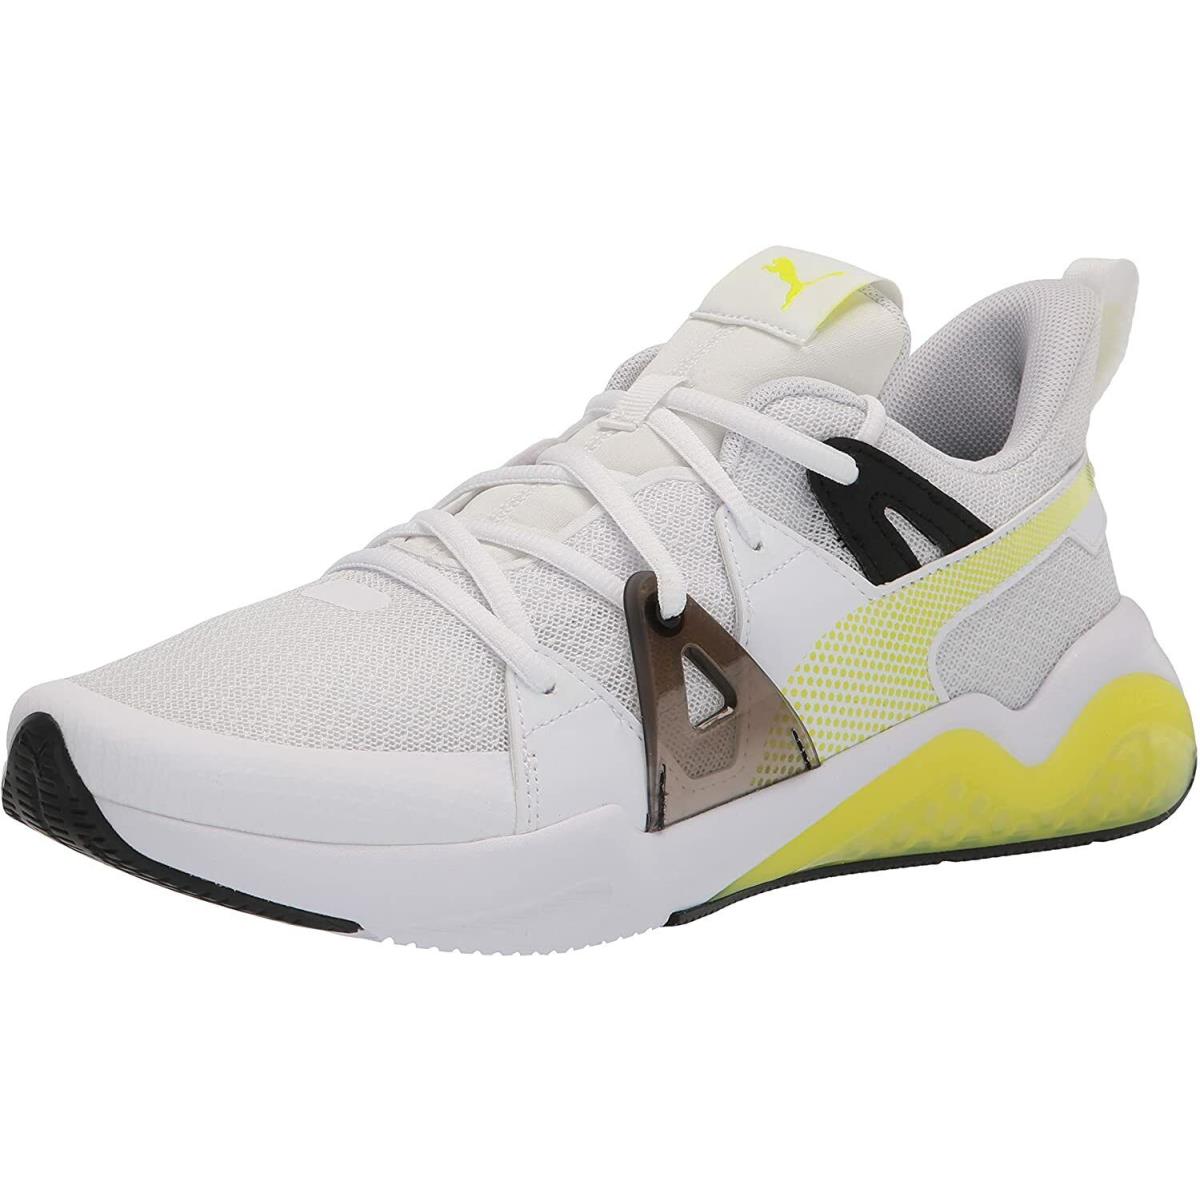 Puma Men`s Cell Fraction Running Shoes 10